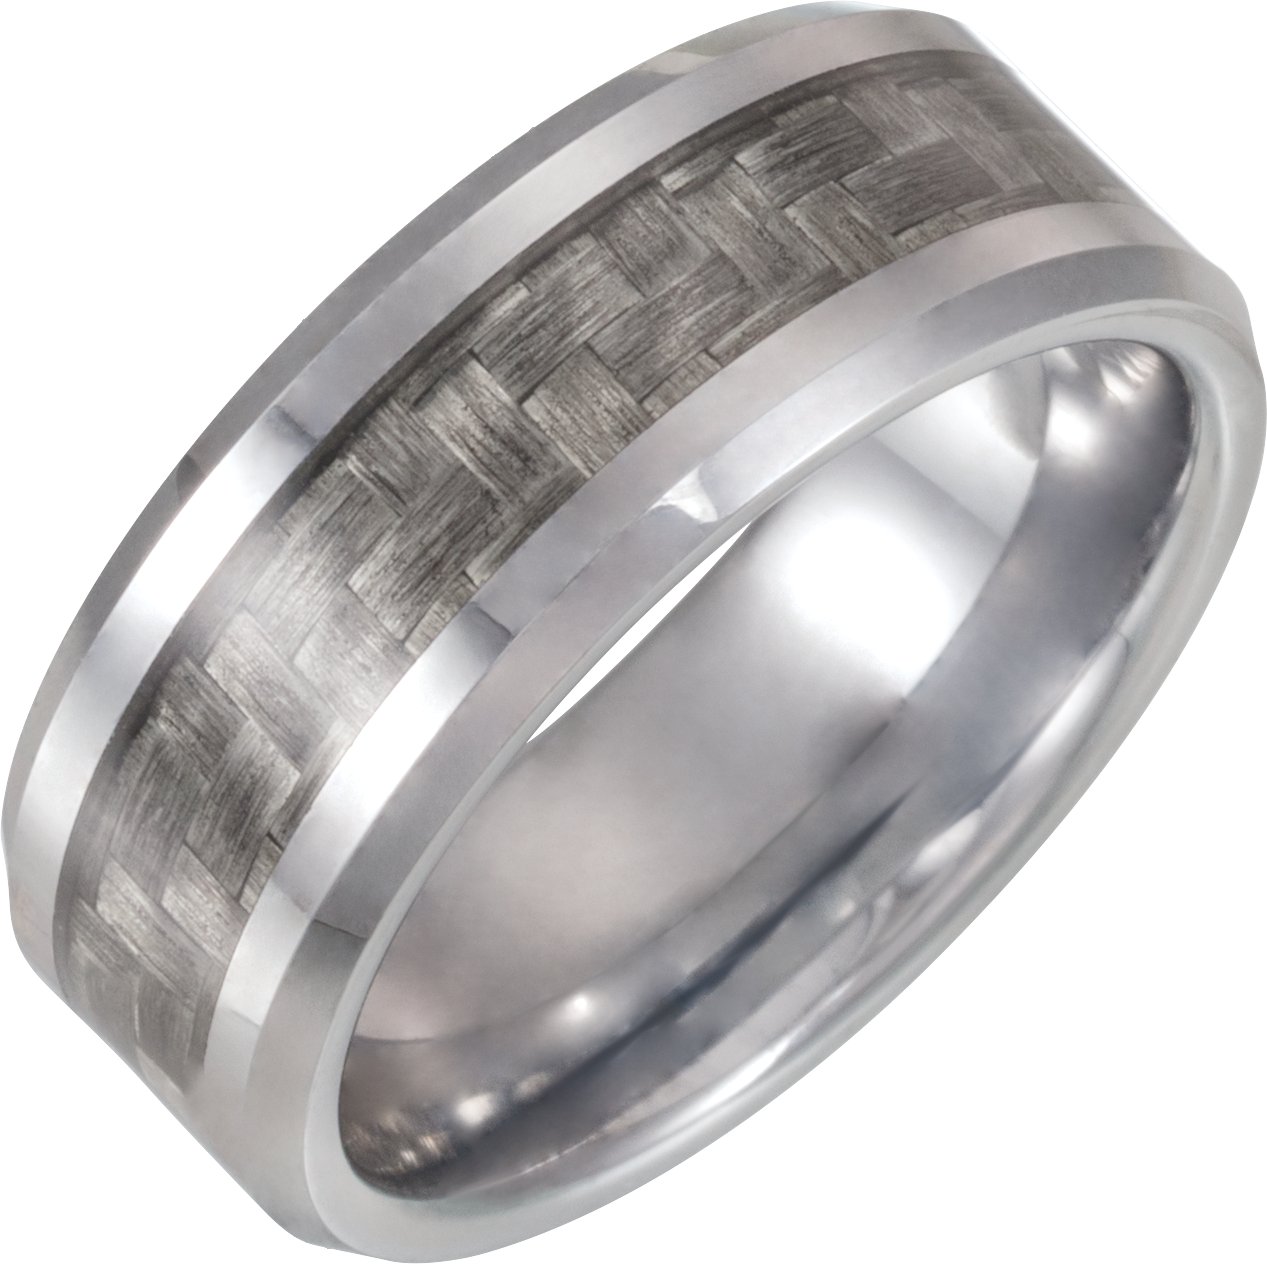 Tungsten 8 mm Band with Carbon Fiber Inlay Size 13.5